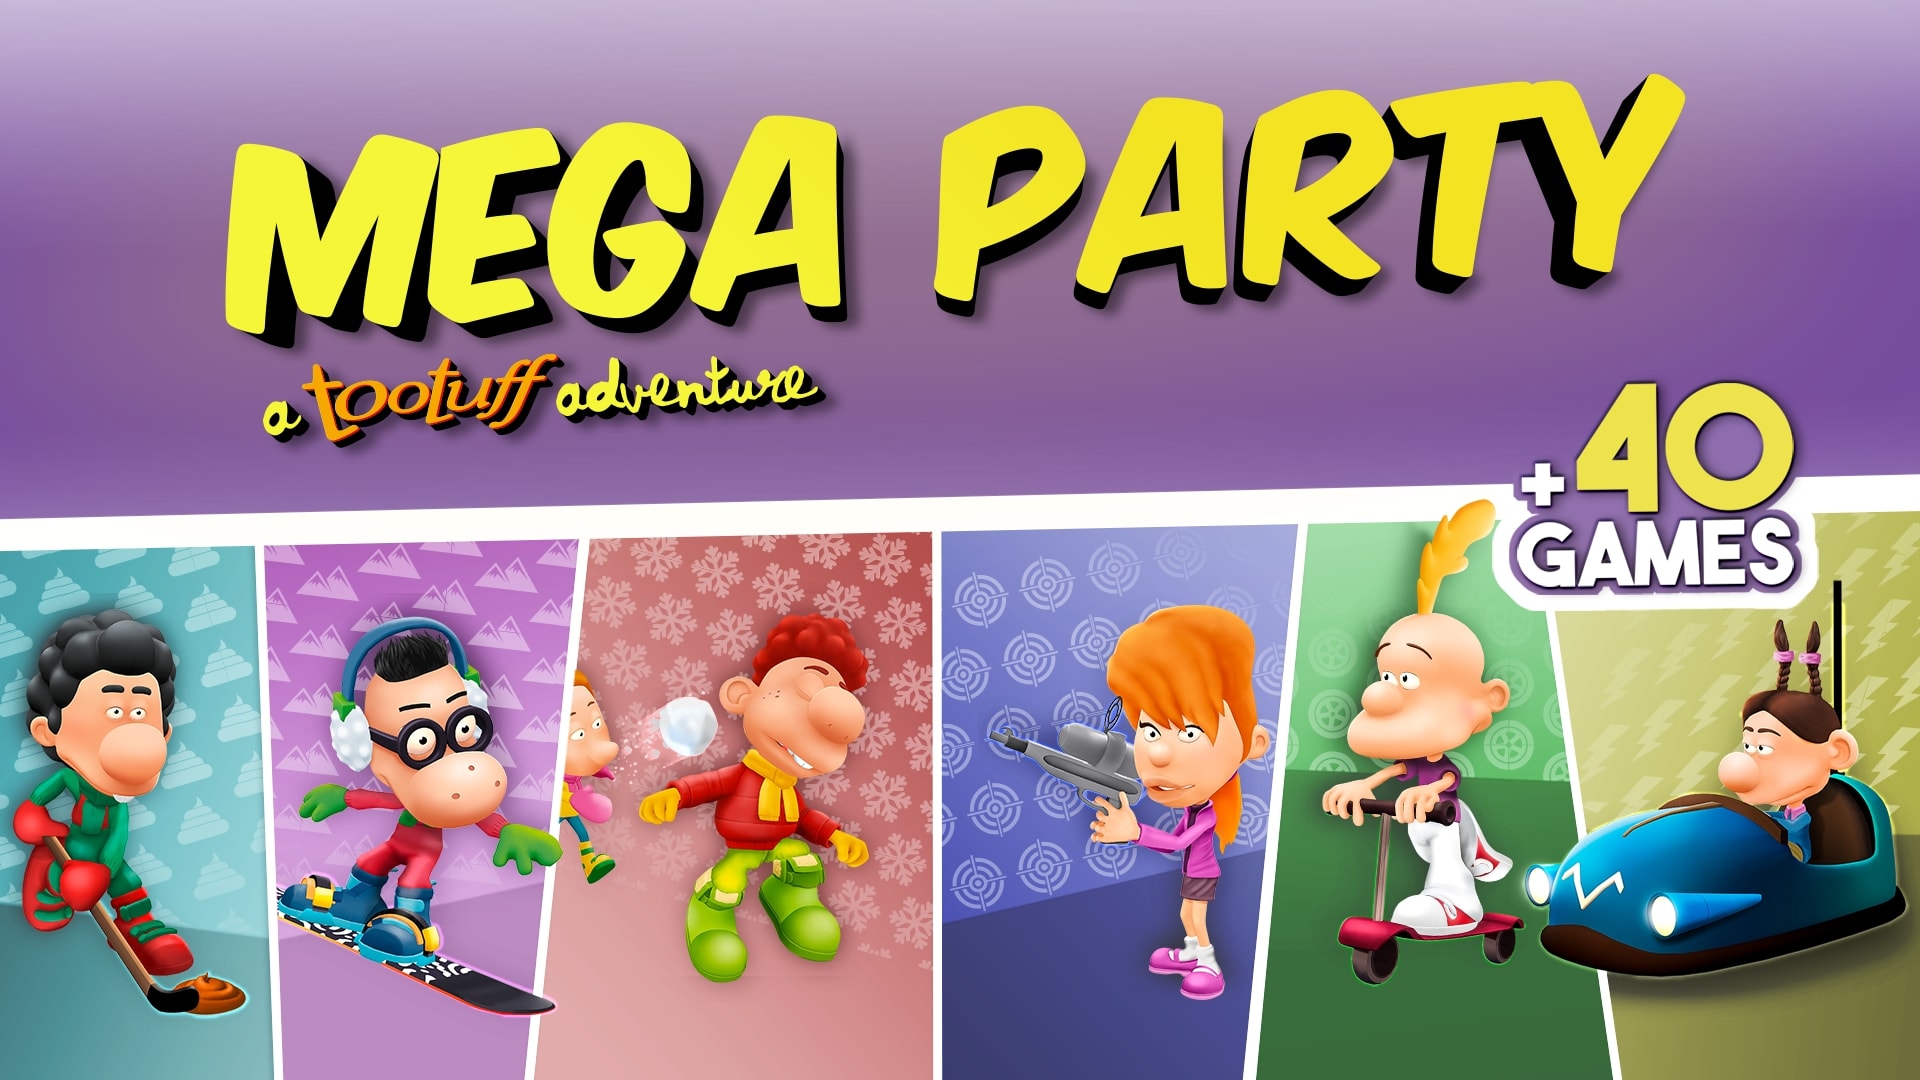 MEGA PARTY - a tootuff adventure